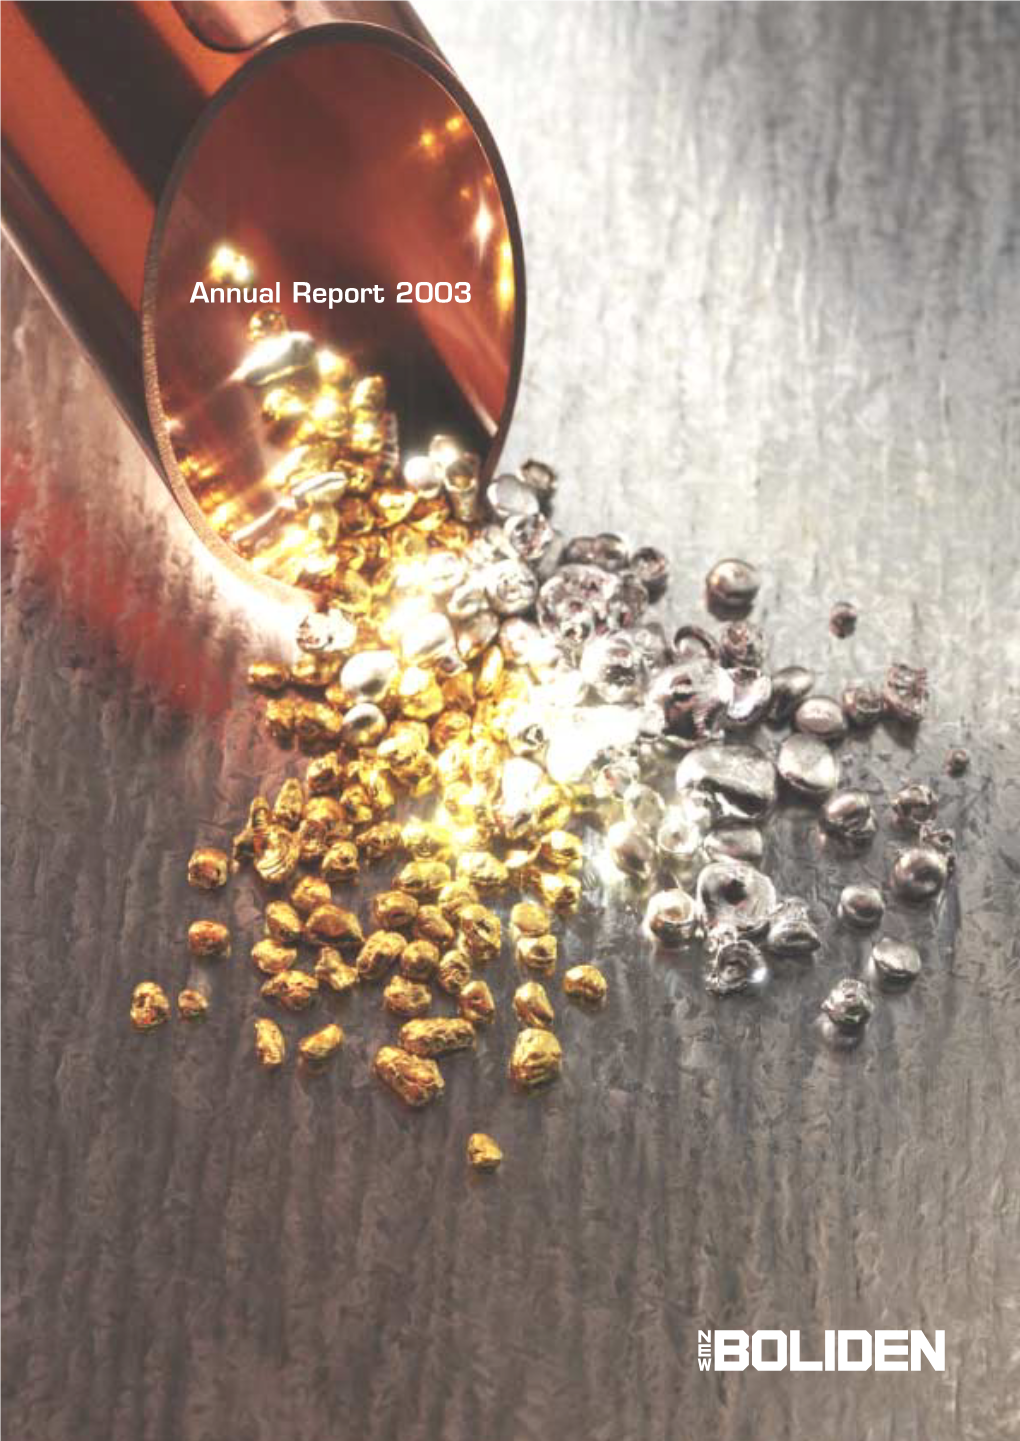 Annual Report 2003 New Boliden Is an International Mining and Smelting Company That Mines, Smelts and Reﬁnes Copper and Zinc, Lead, Gold and Silver